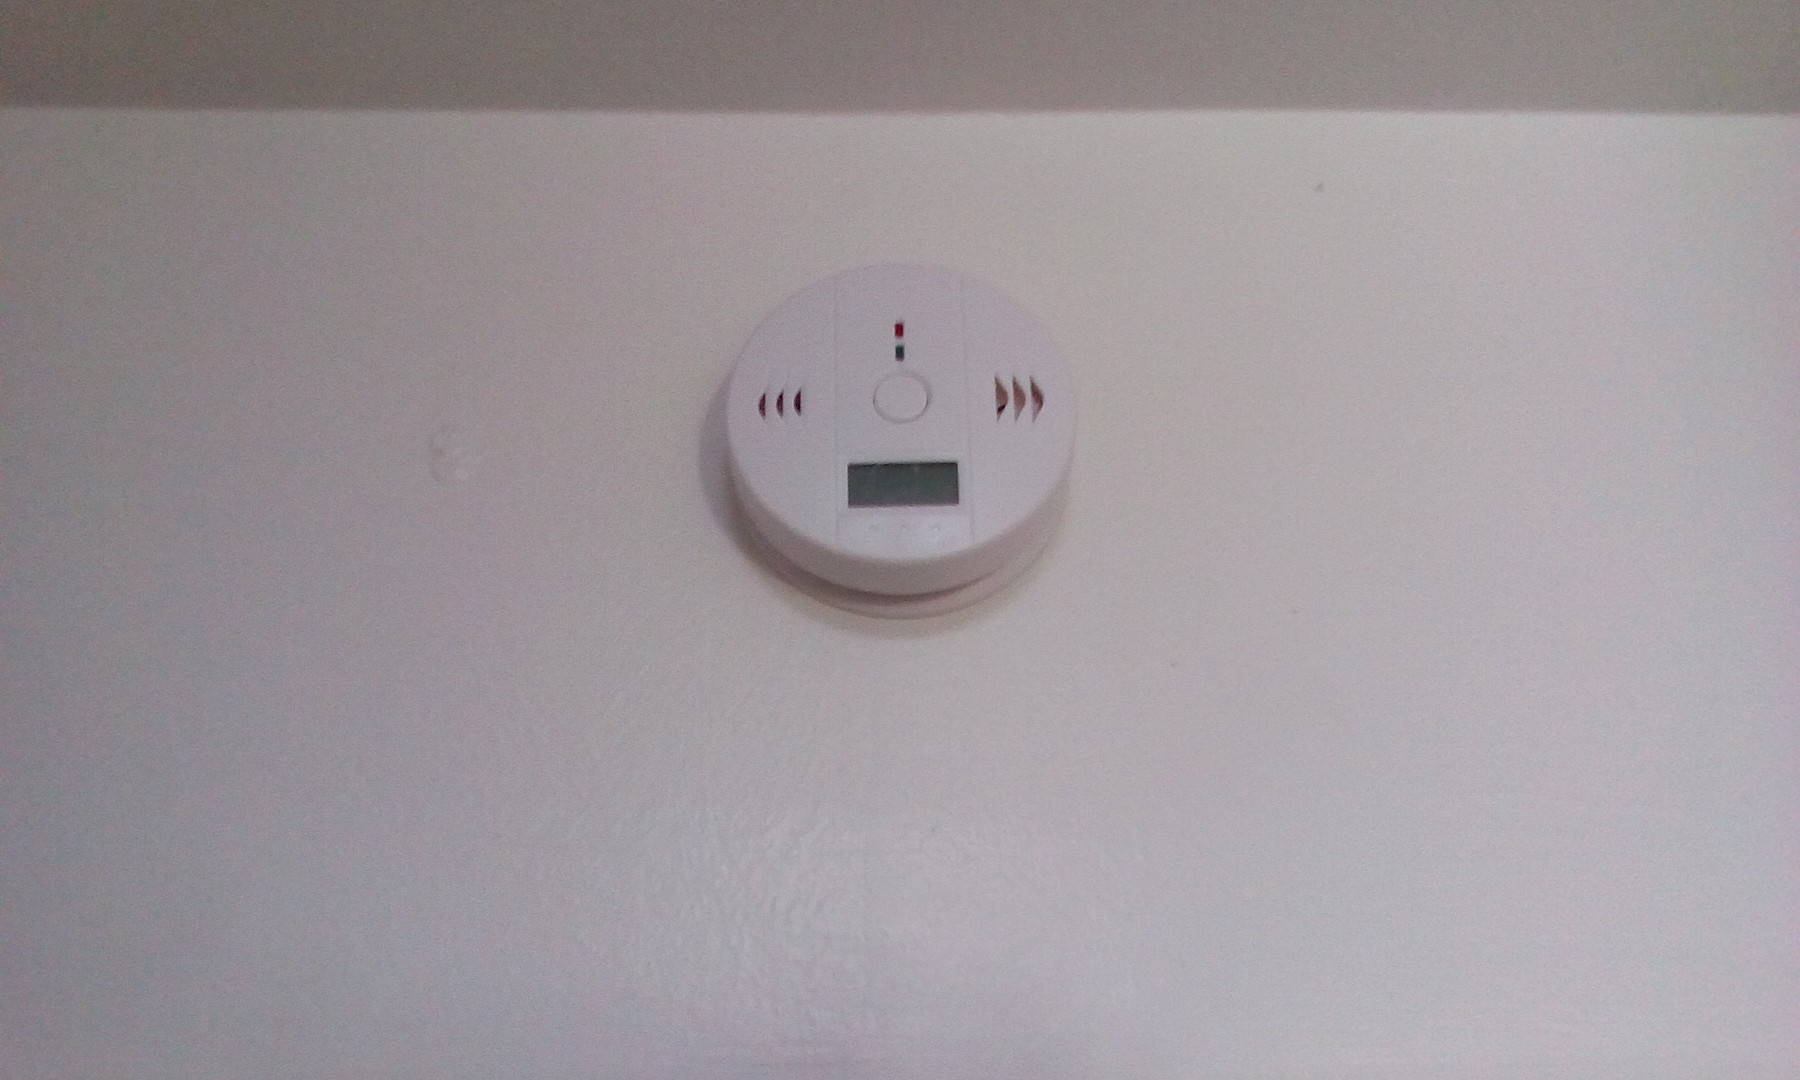 CO Detectors, RECALLED 06-11-2021 BY AMAZON SAFETY